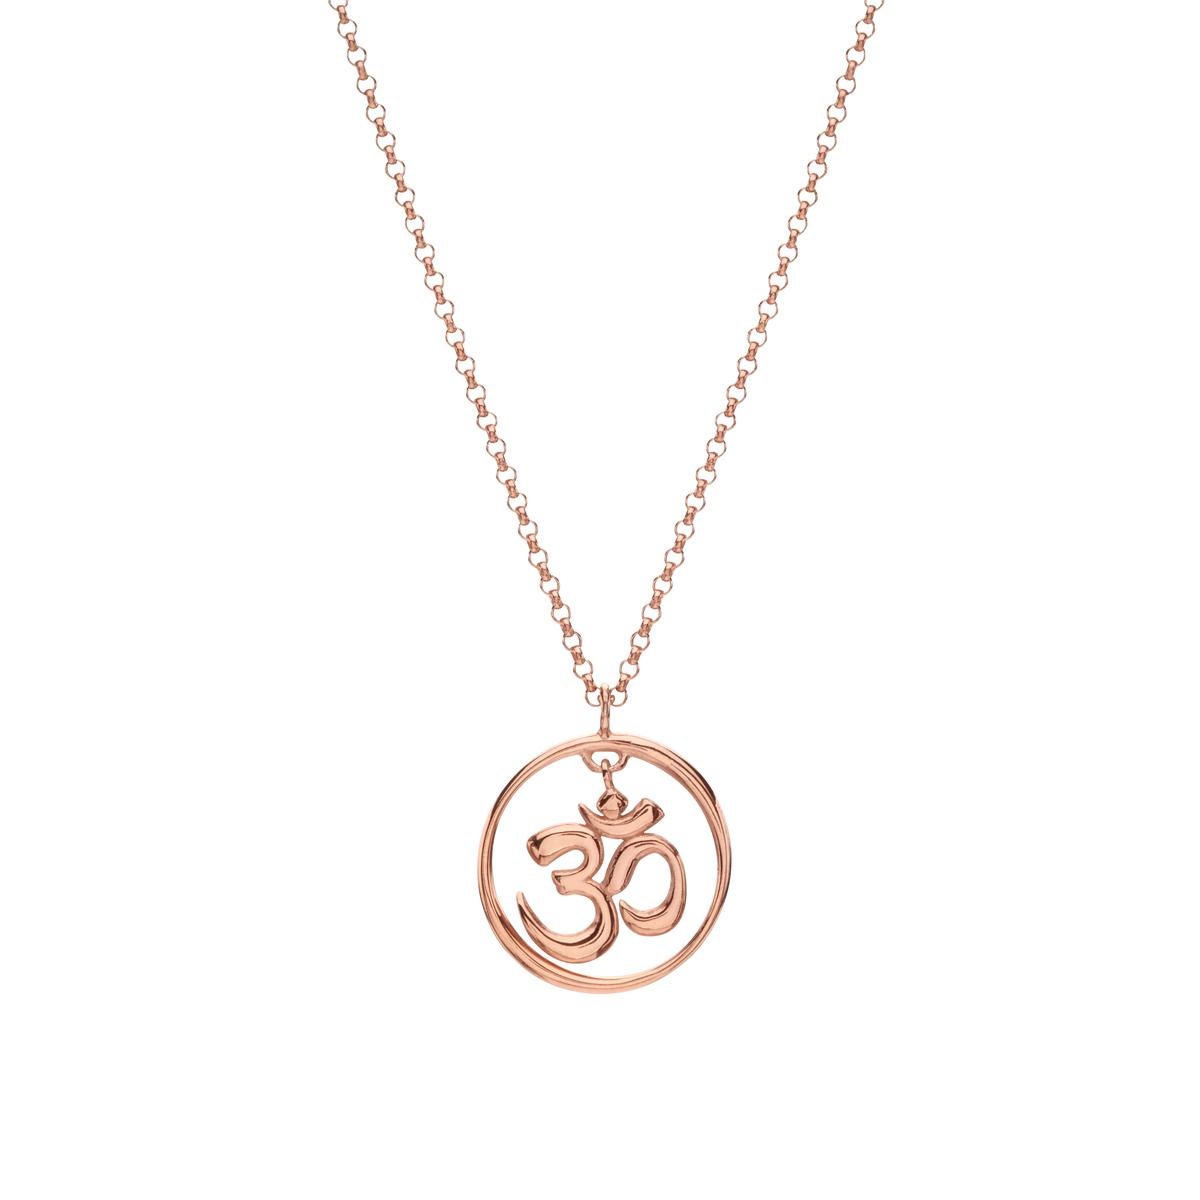 Unique Pendant necklace inspired by Yoga OM Symbol, handcrafted in 14Kt gold. 
Om is the sound of universe and one of the most important spiritual symbols. Om symbolizes the past, the present and the future, however it has a different meaning for